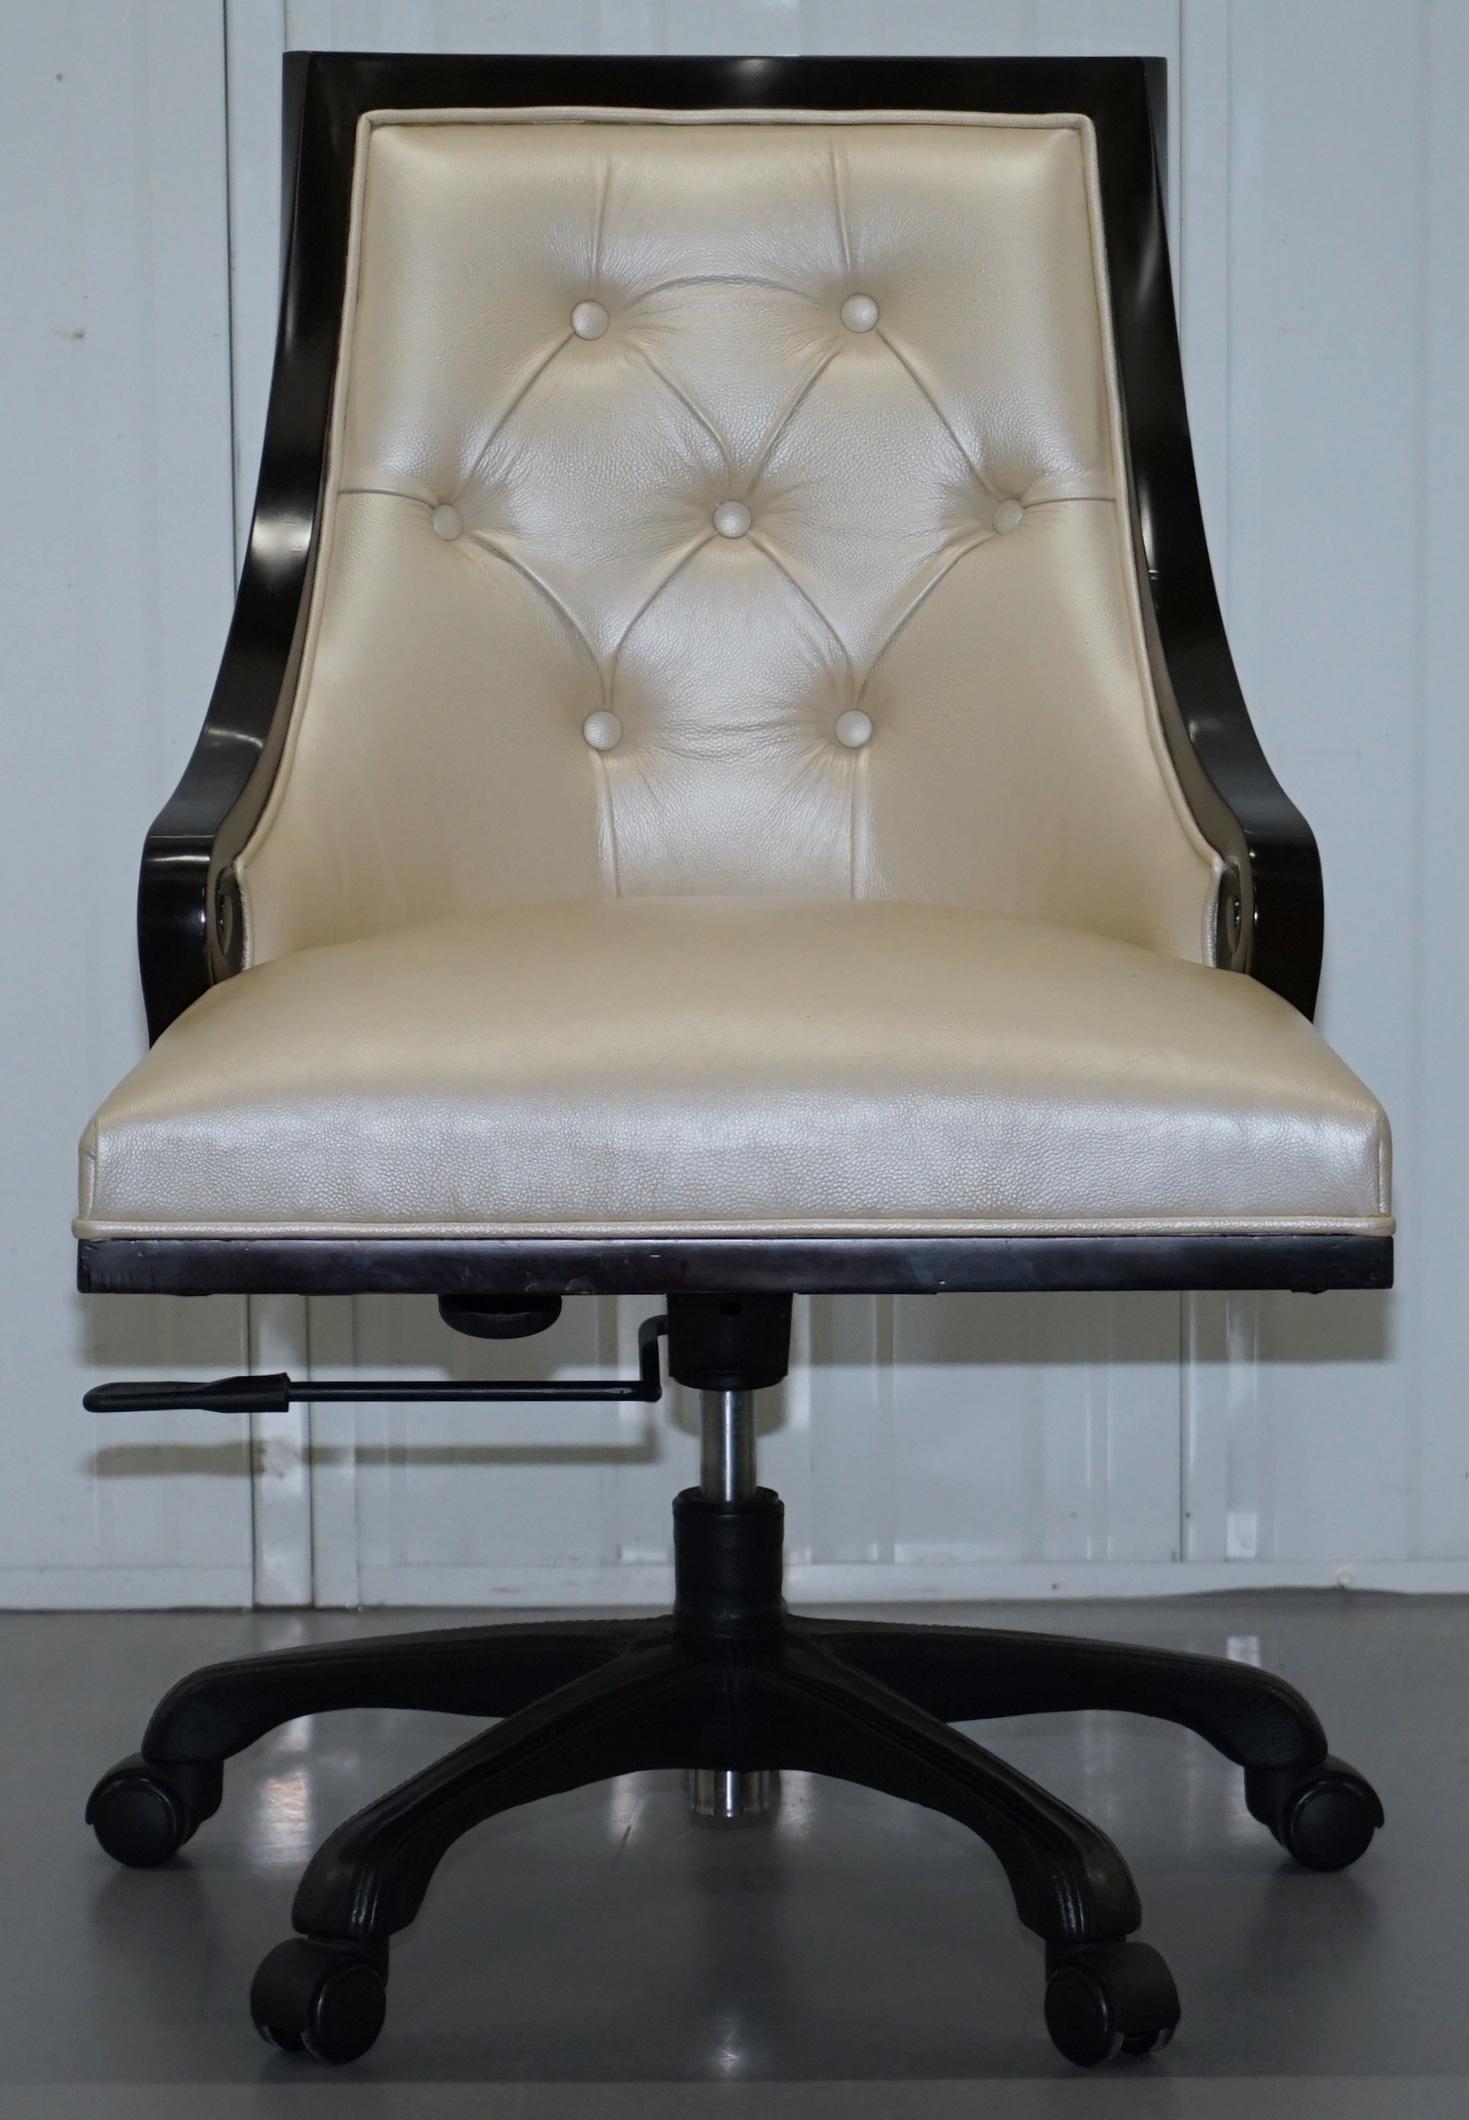 We are delighted to offer for sale this stunning RRP £2430 Christopher Guy Megeve pearl leather height adjustable office chair

A very good looking and piece, it has a lovely pearly finish to the upholstery, the timber has been stained very dark